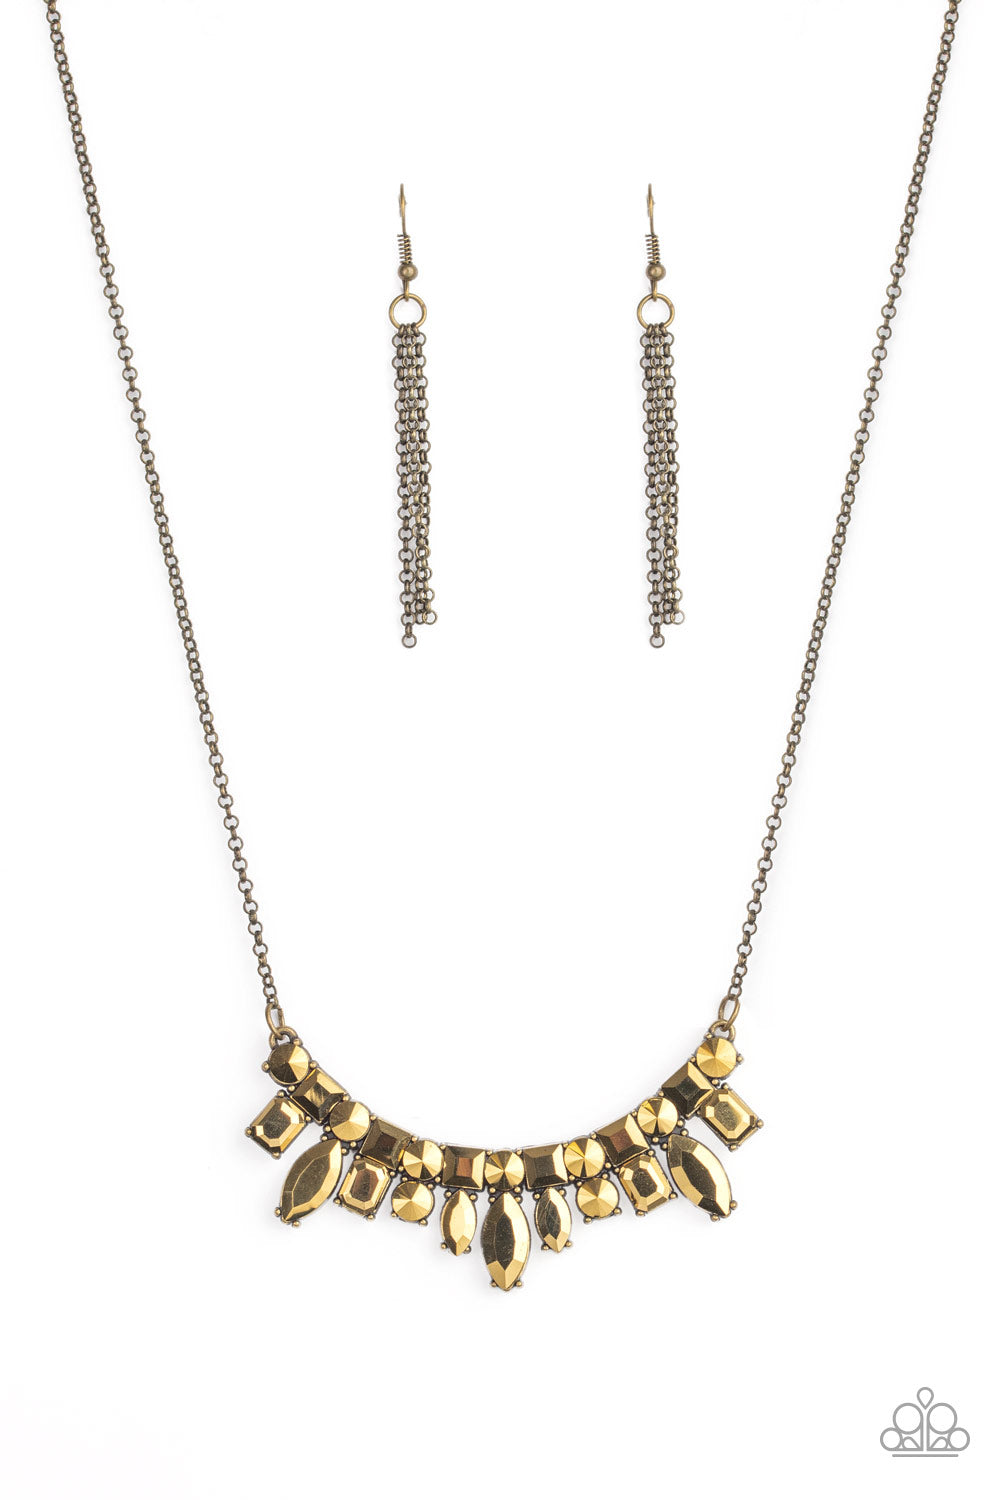 Paparazzi Wish Upon a ROCK STAR Brass Short Necklace